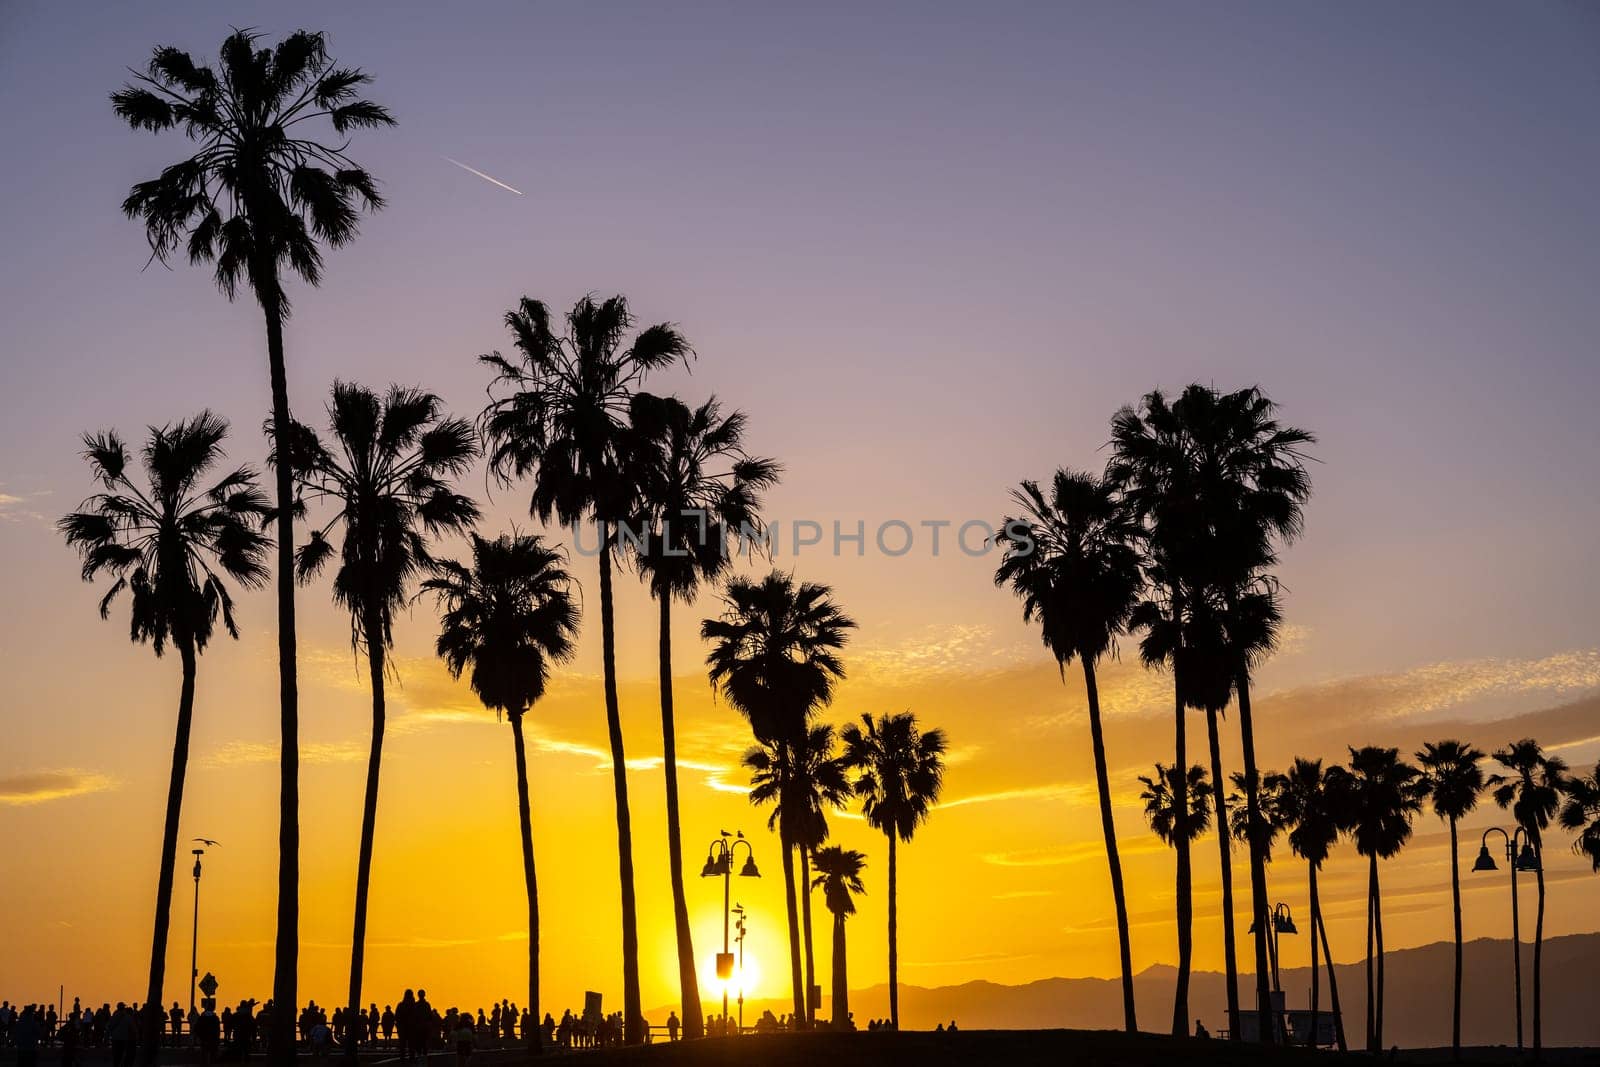 Palm trees at sunset by elxeneize